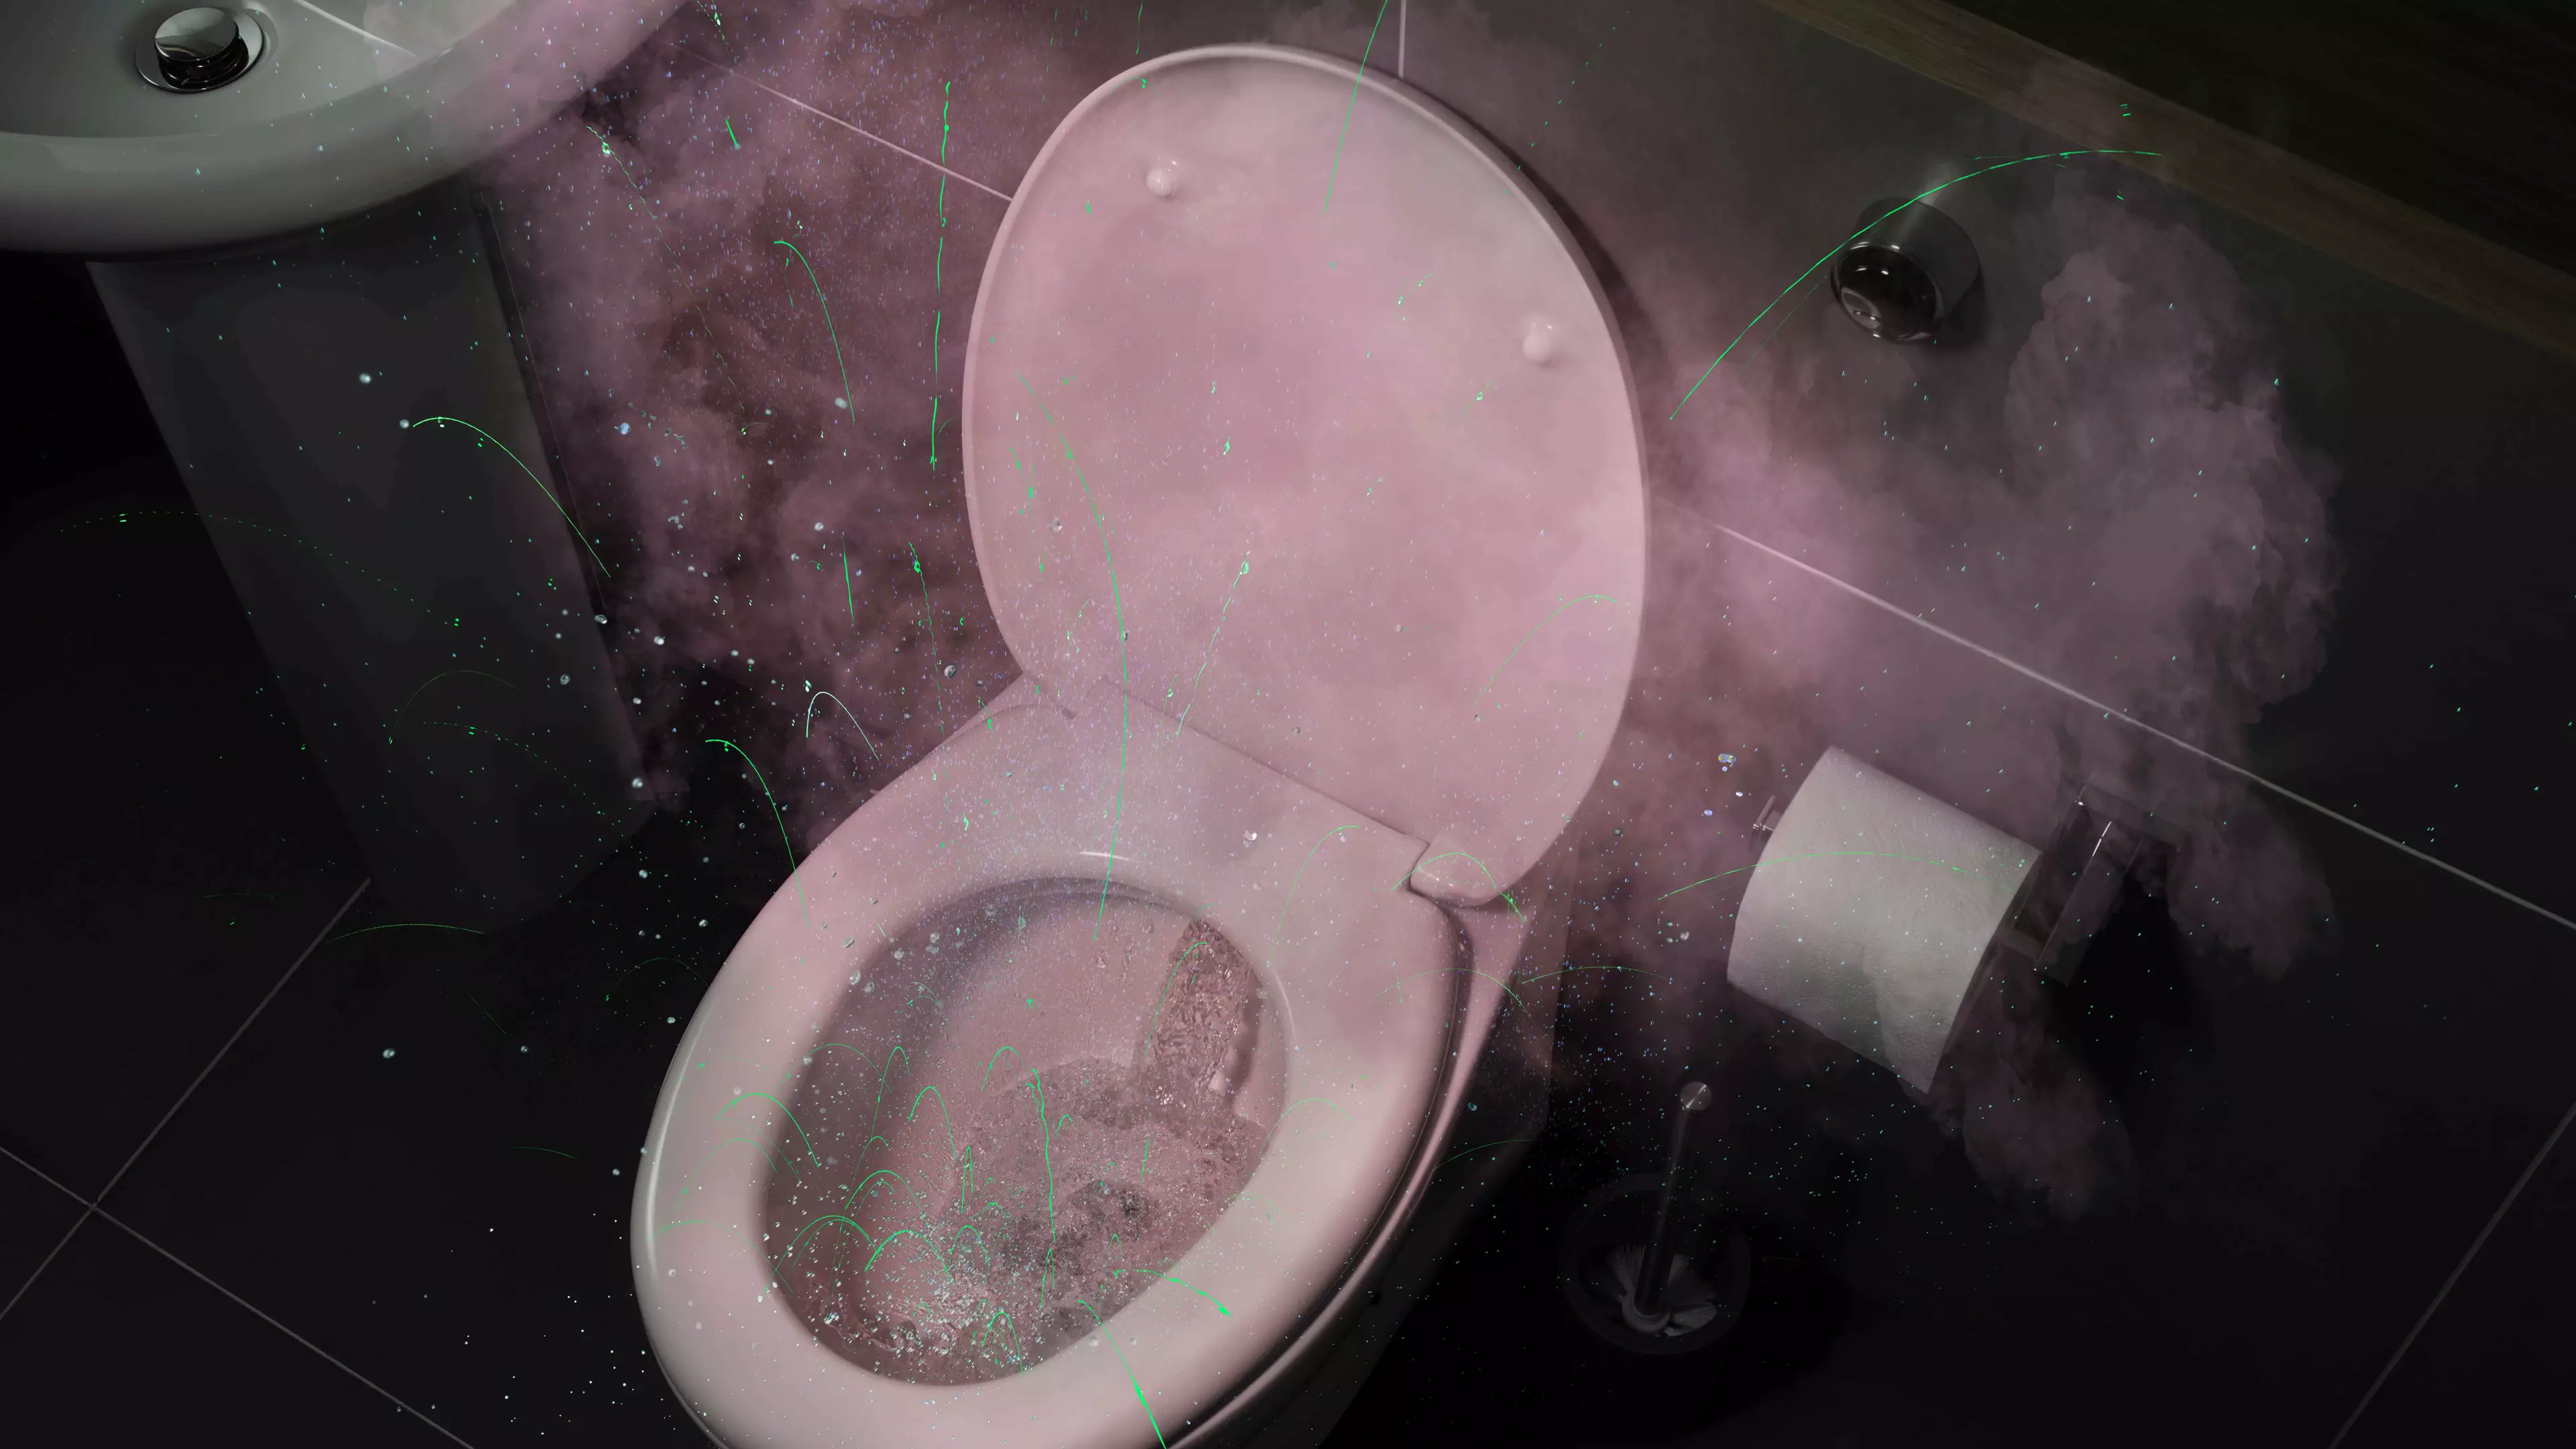 Disgusting Images Will Make You Put Down The Toilet Seat Before Flushing